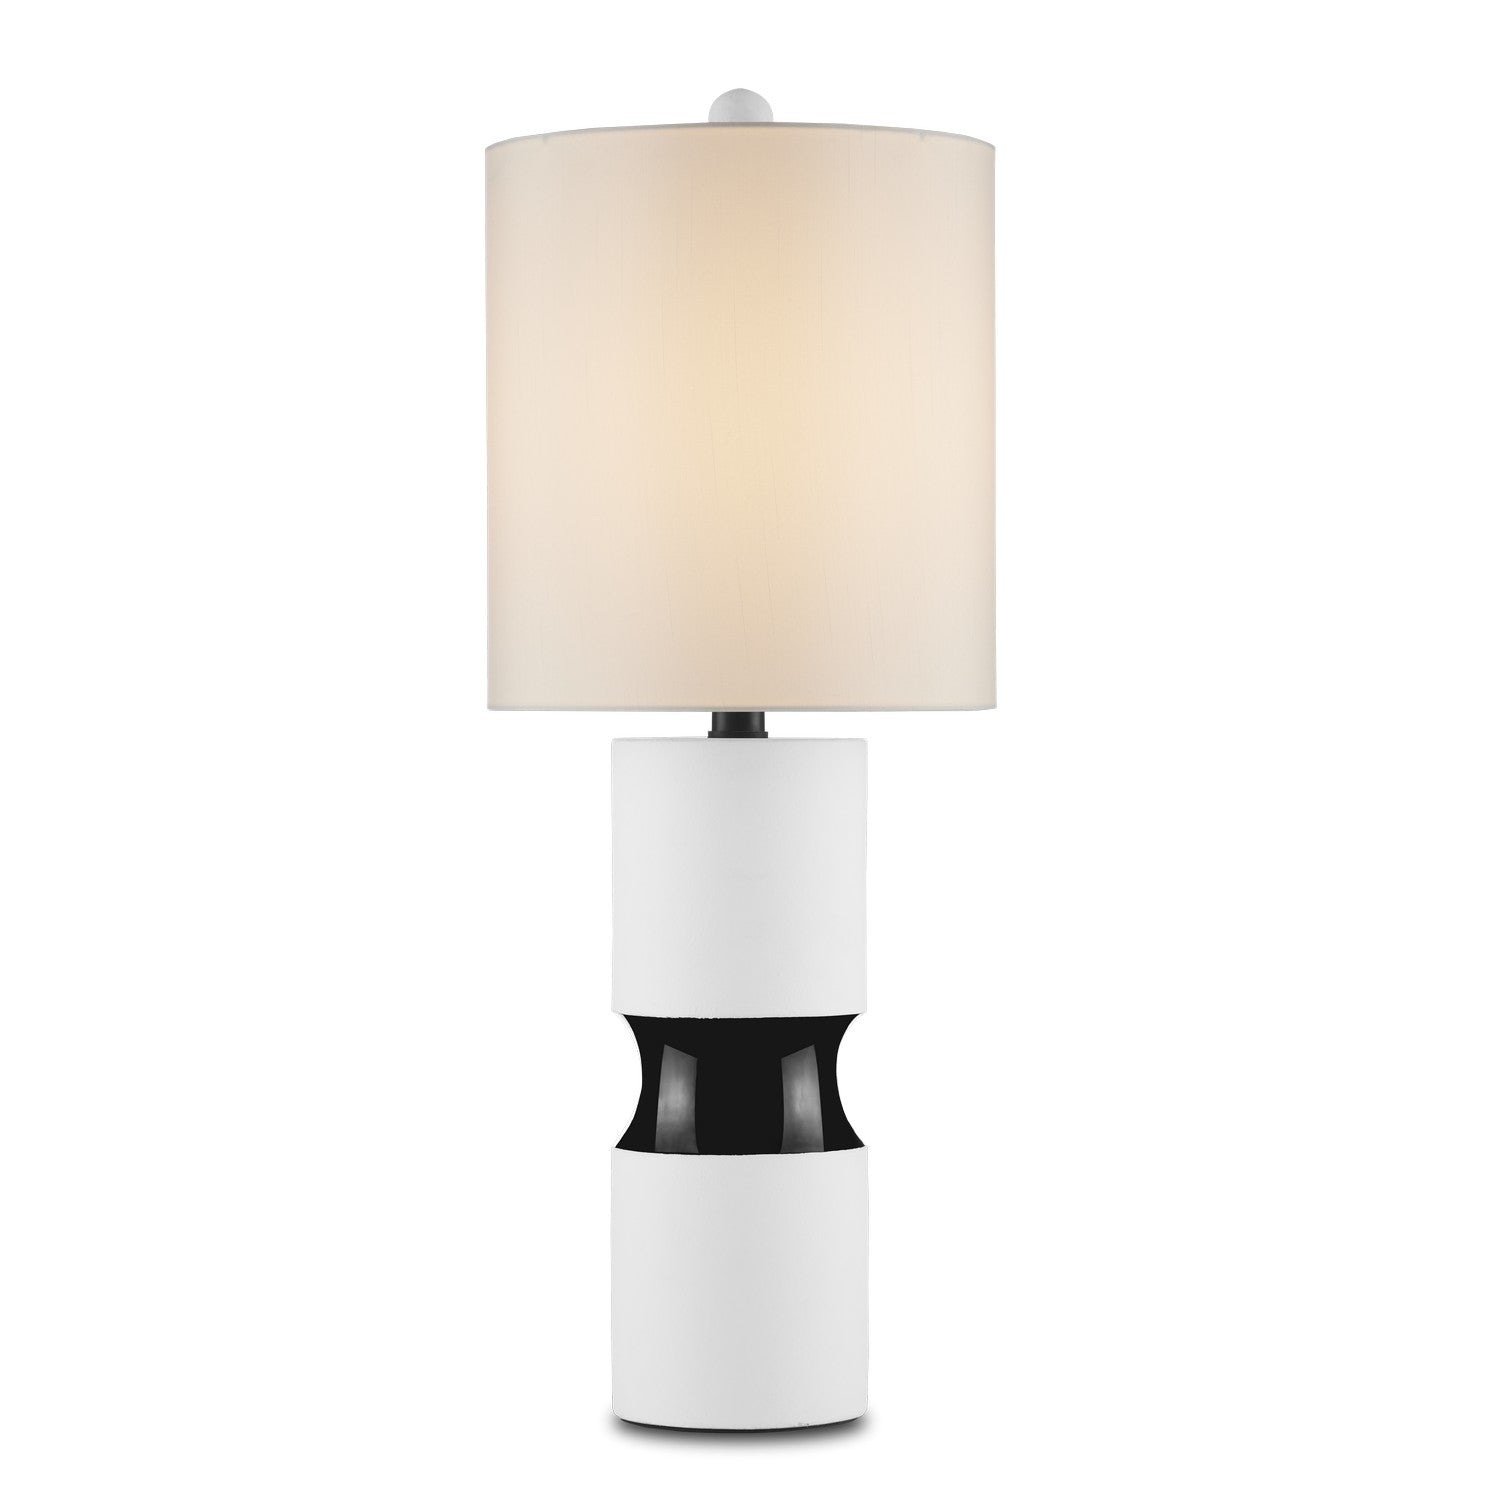 Currey and Company - 6000-0856 - One Light Table Lamp - Althea - Off White/Black